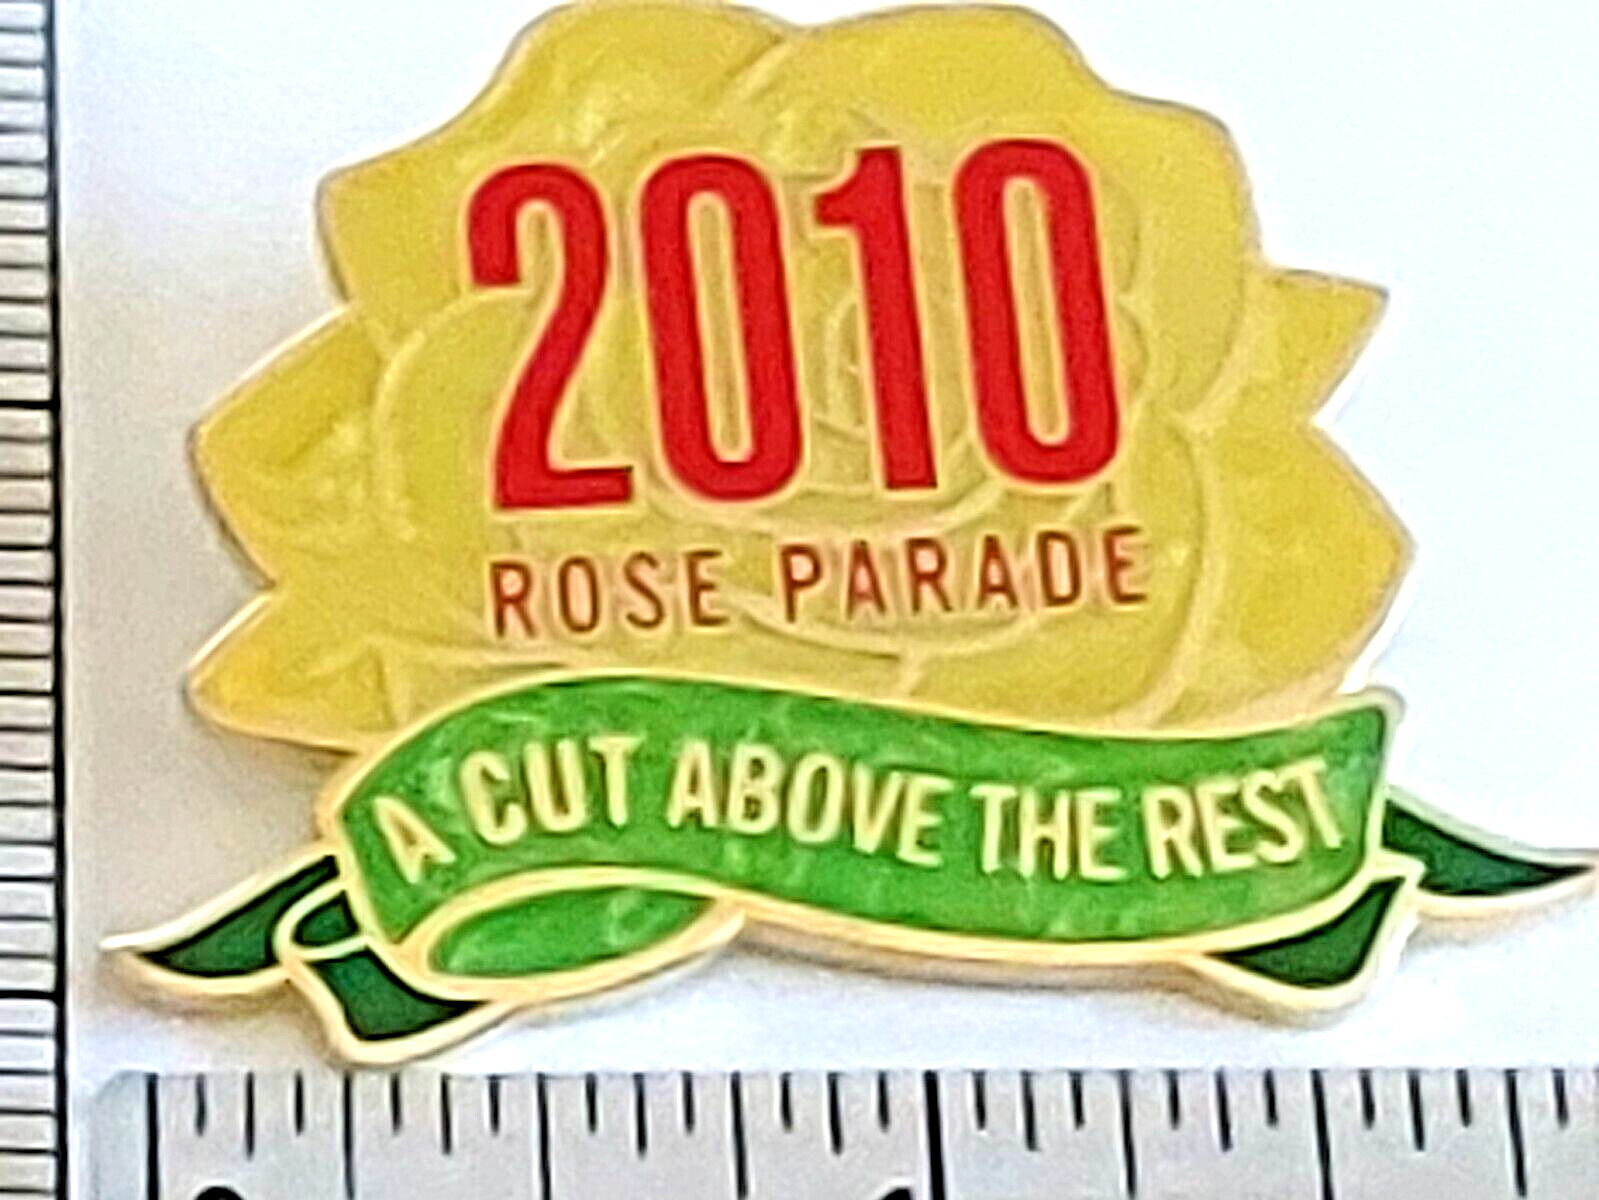 Rose Parade 2010 A CUT ABOVE THE REST Lapel Pin (051123)